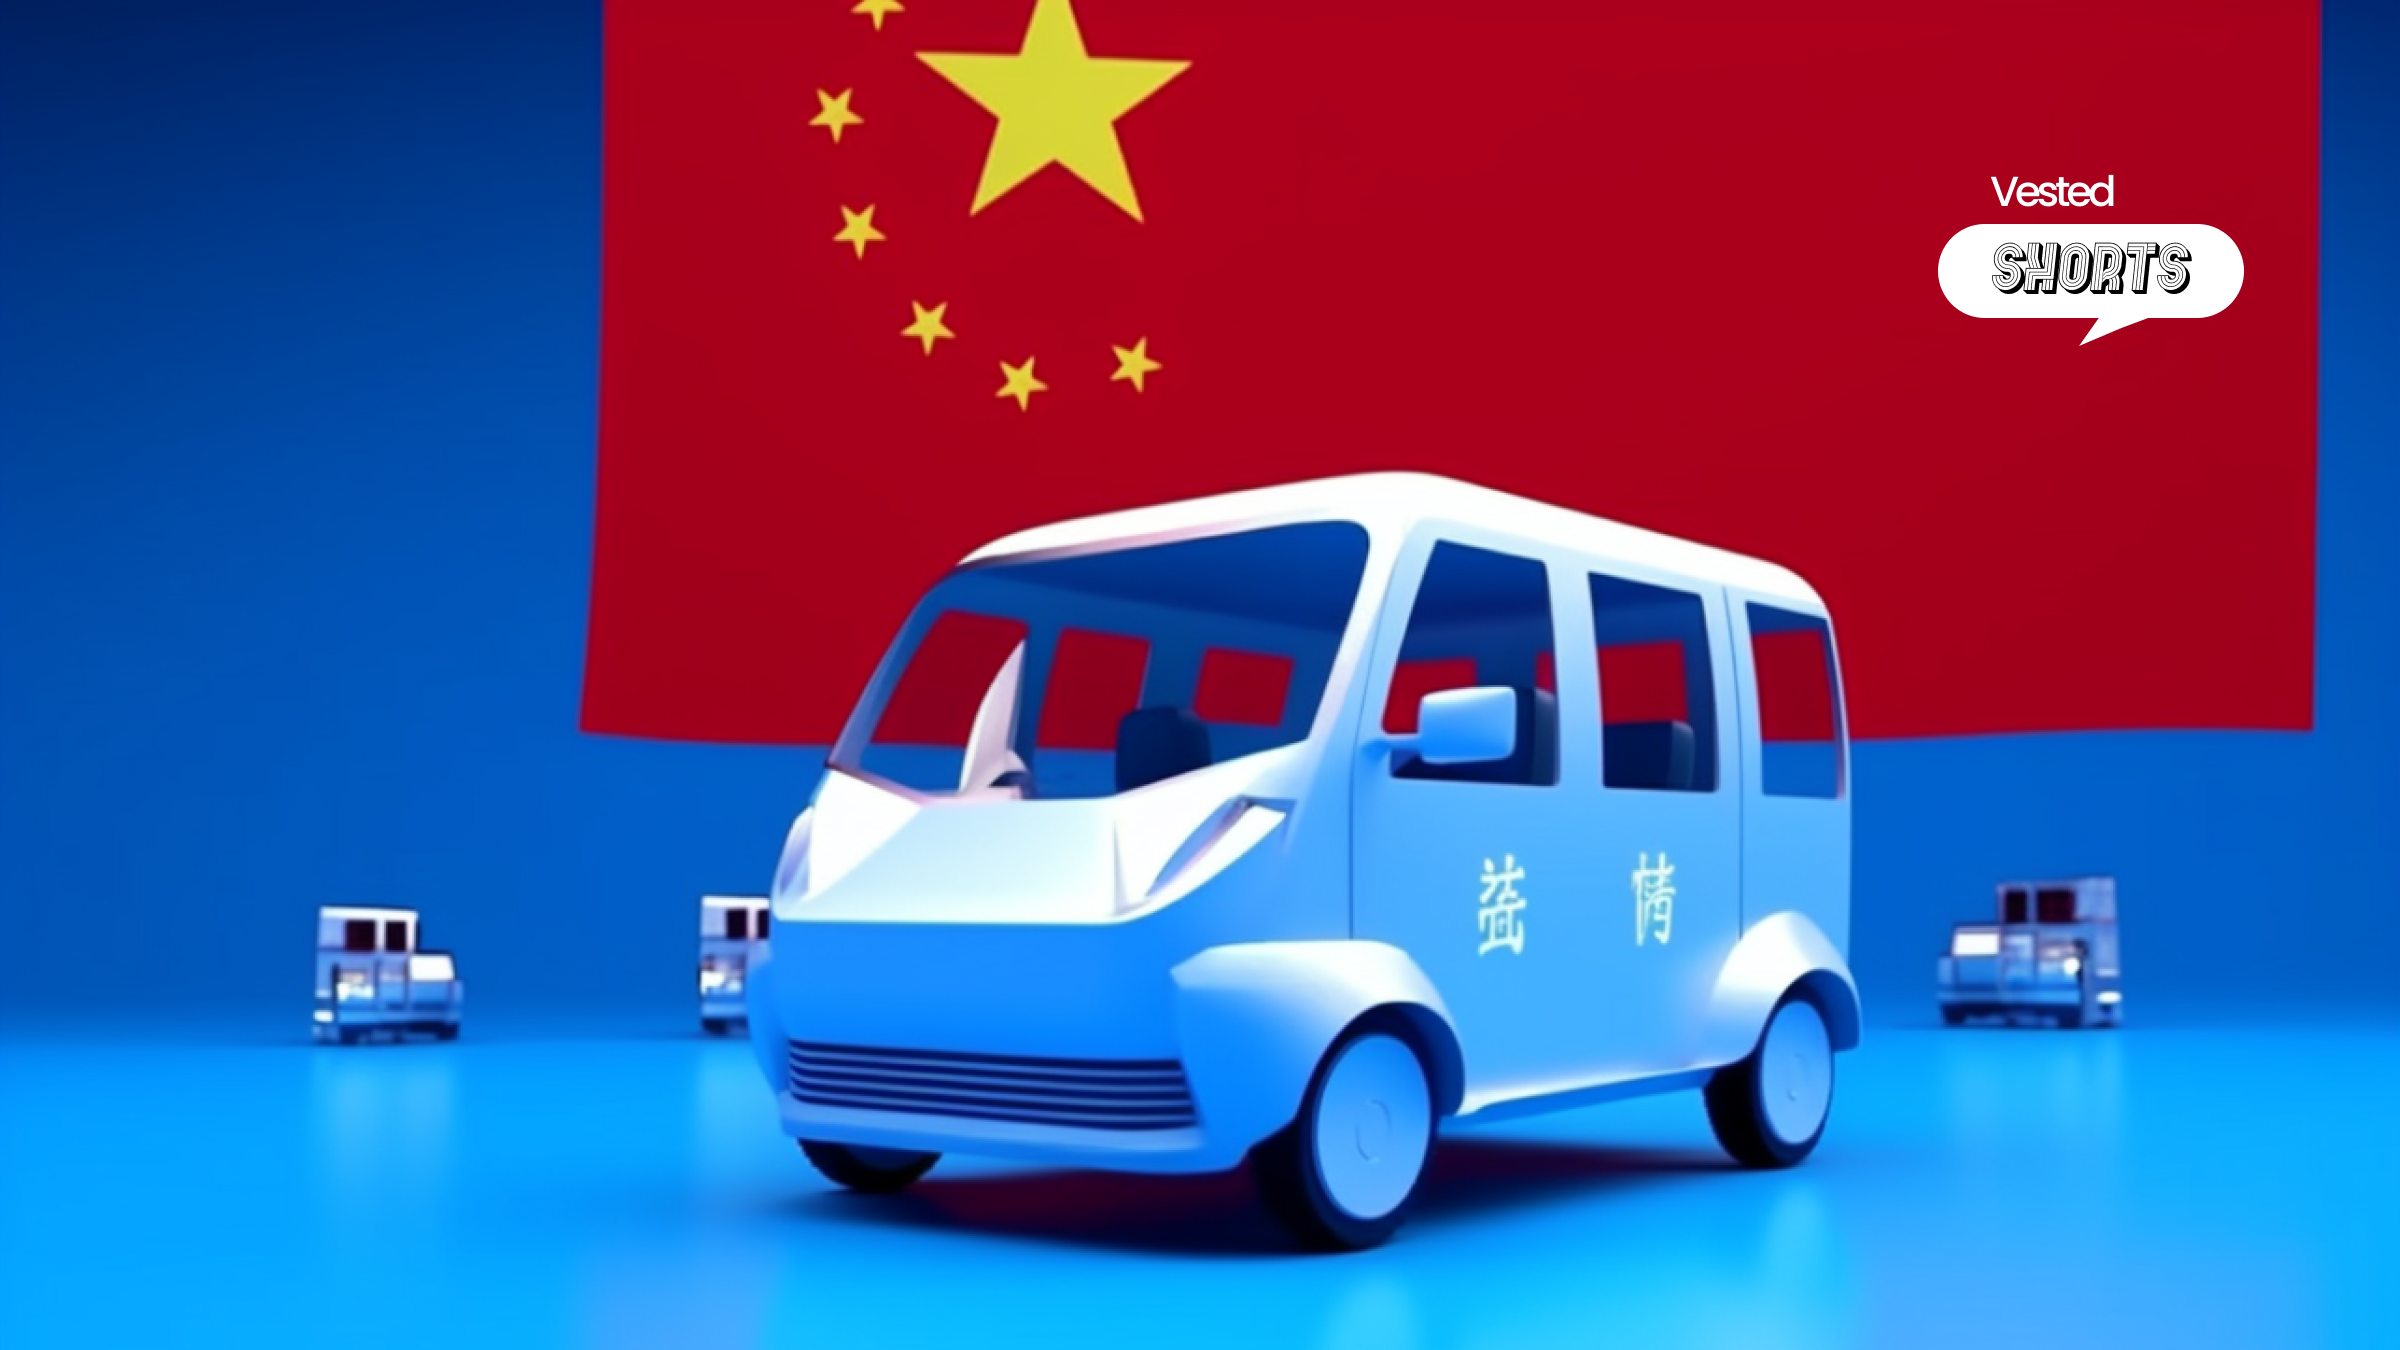 Vested Shorts: World’s reliance on China and China’s EV play